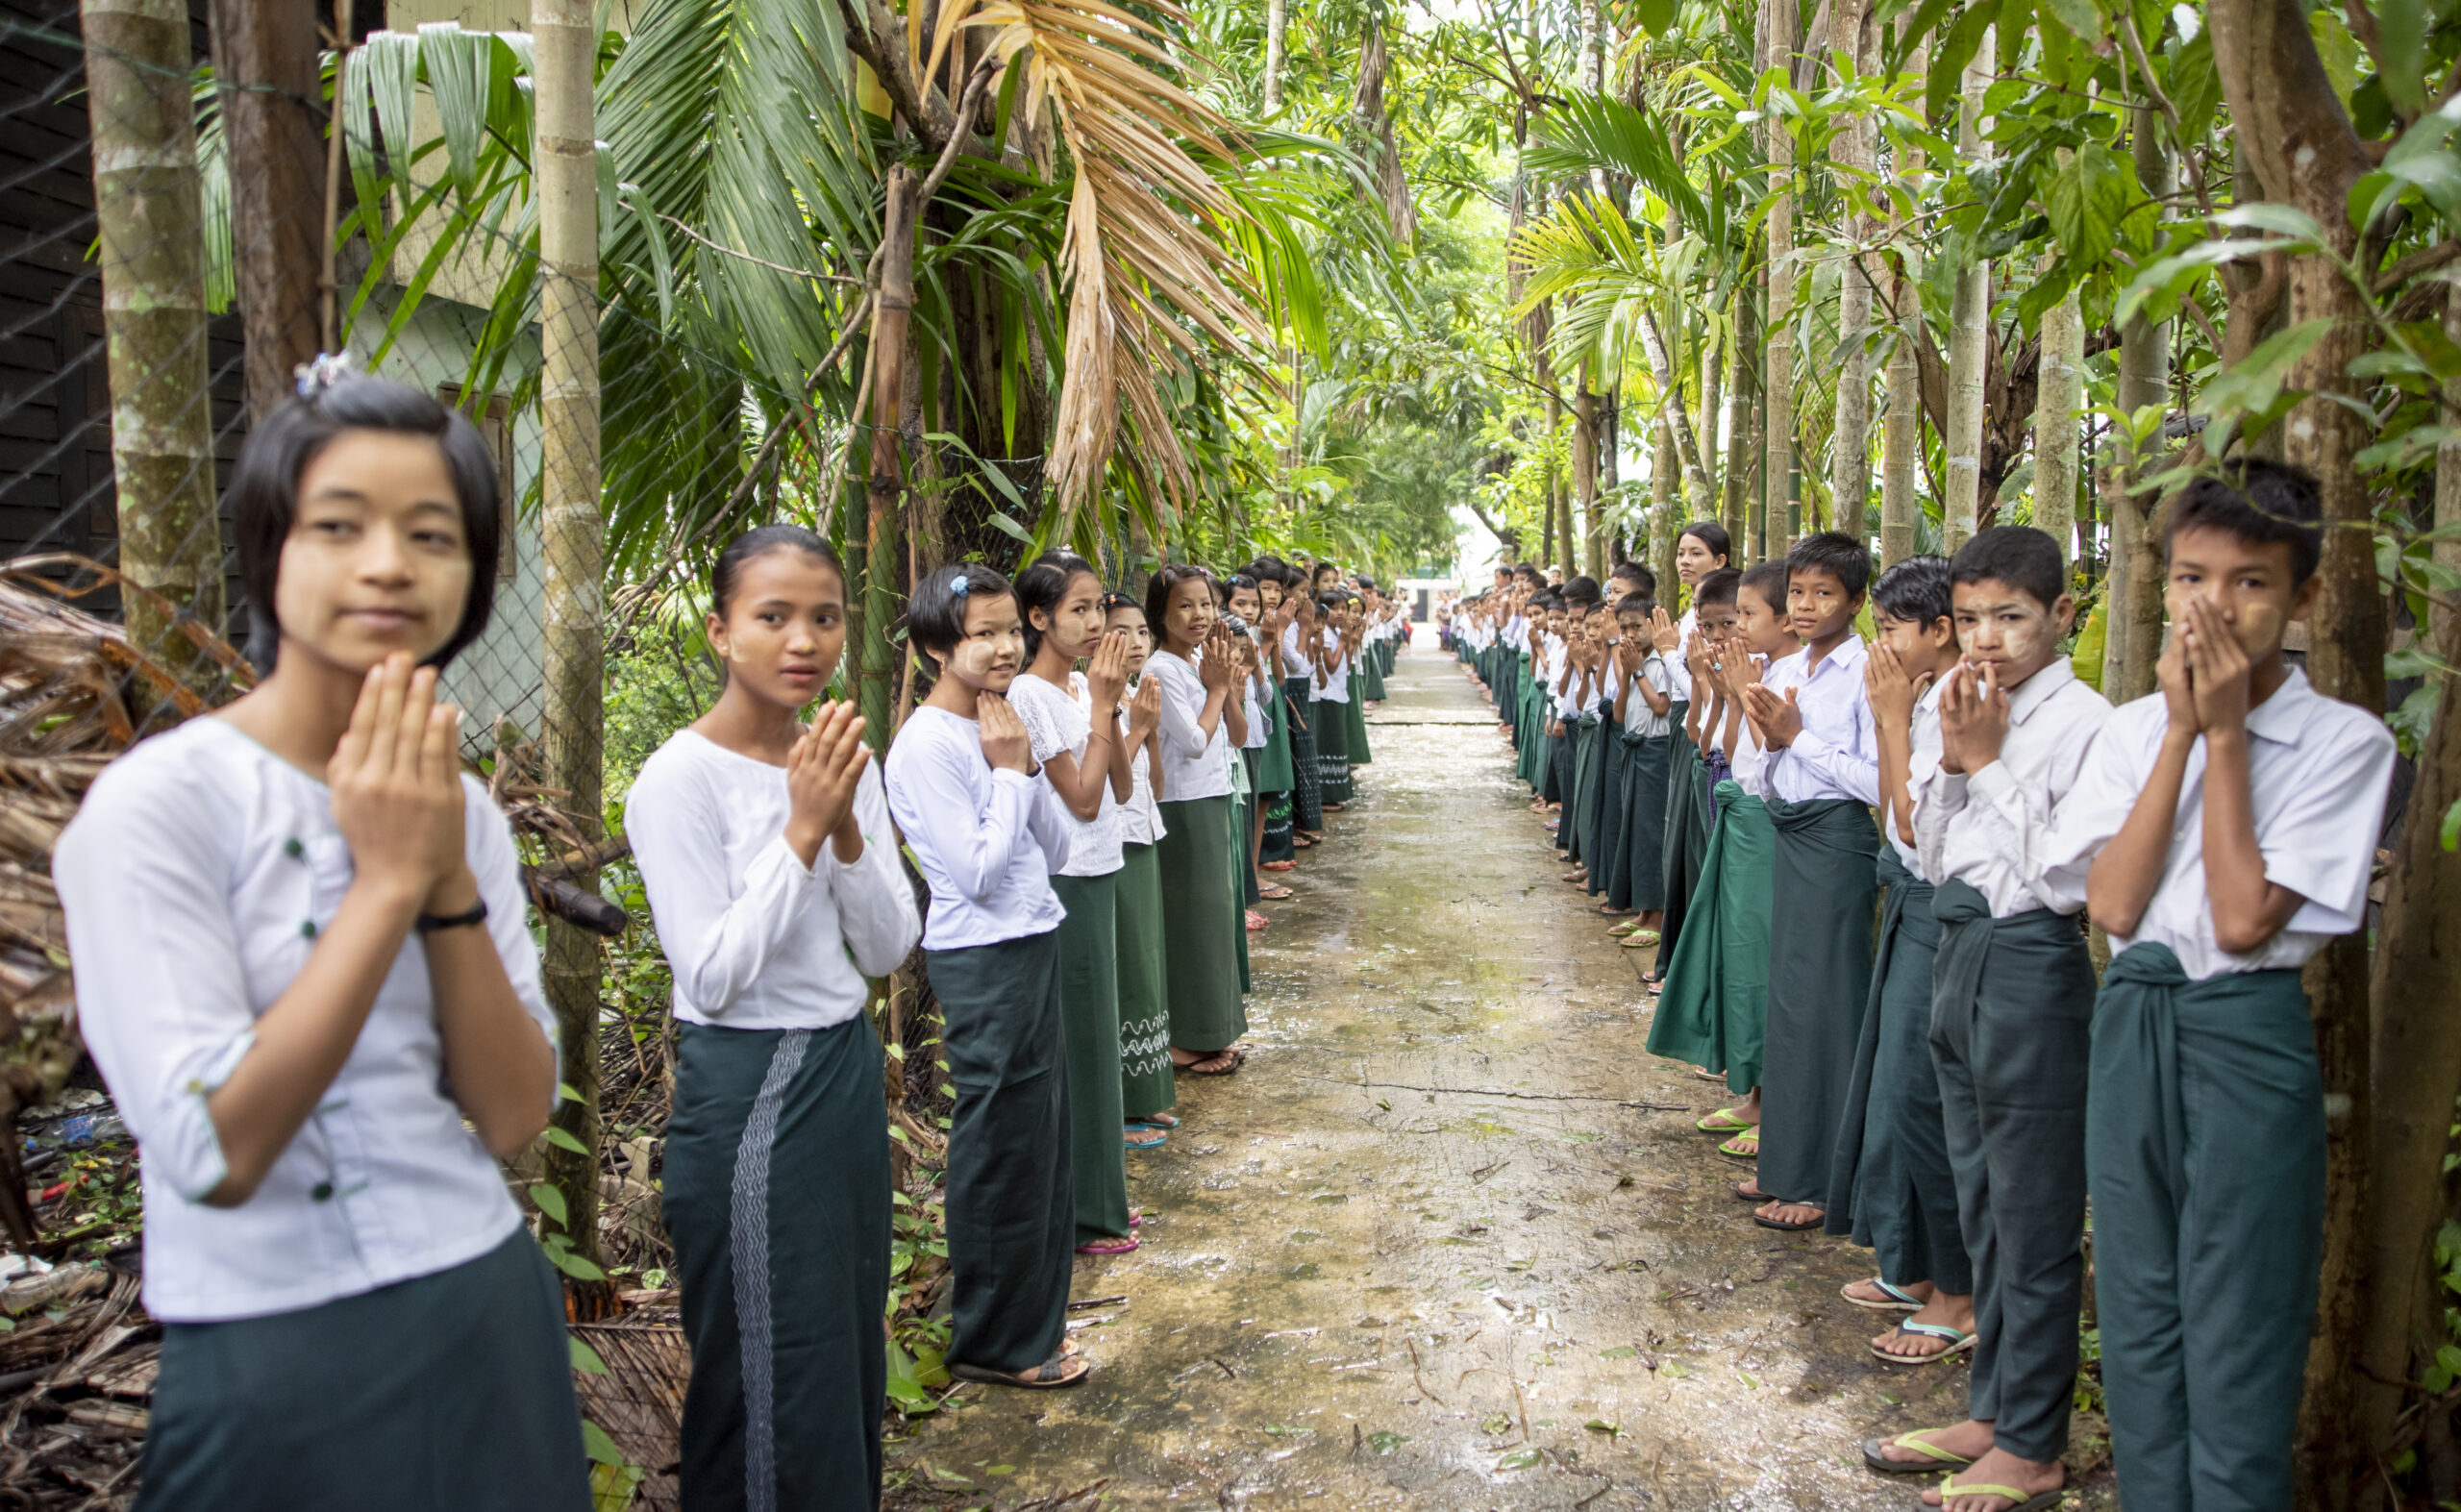 July 8, 2019. Sein Lay Kone village, Irrawaddy Delta, Myanmar. Children in a rural village in Myanmar welcome visitors with a traditional greeting. 
“The whole village is cooperating to teach the kids in this school about emergencies,” says Swe Swe Win–principal at the only school in Sein Lay Kone village, Myanmar where students (pictured) practice drop-and-cover drills to prepare for earthquakes. The community—located on a river close to the ocean—is only accessible by weaving through narrow, verdant channels by boat. Its residents are at-risk of cyclones, storms, floods, tsunamis, and earthquakes. Parents and non-parents alike have come together to ensure residents—especially kids—know what to do in case of crises. The Red Cross has stepped up to train students at the school on first aid and light search-and-rescue. “This training is not only useful at the school, but also so kids can treat their families and people in the community,” comments Swe Swe Win. The Red Cross has also distributed equipment such as solar panels, an early warning system, and first aid kits to the school.
The American Red Cross works alongside the Myanmar Red Cross to prepare disaster-prone communities for cyclones, floods, tsunamis, earthquakes, and other emergencies. We train and equip families with the tools they need to mitigate natural disaster risks and to be first responders when crises strike. In Myanmar, the American Red Cross teaches basic first aid, light search-and-rescue, and post-disaster epidemic control in 20 communities—in addition to running disaster simulations and forming village committees who mobilize when disasters hit. In 24 schools, we teach students basic first aid, light search-and-rescue, evacuation activities, and distribute emergency equipment—such as solar panels, fire extinguishers, megaphones, early warning speakers, first aid kits, and helmets. In Myanmar, some American Red Cross project sites are urban, while others sit in river deltas only accessible by